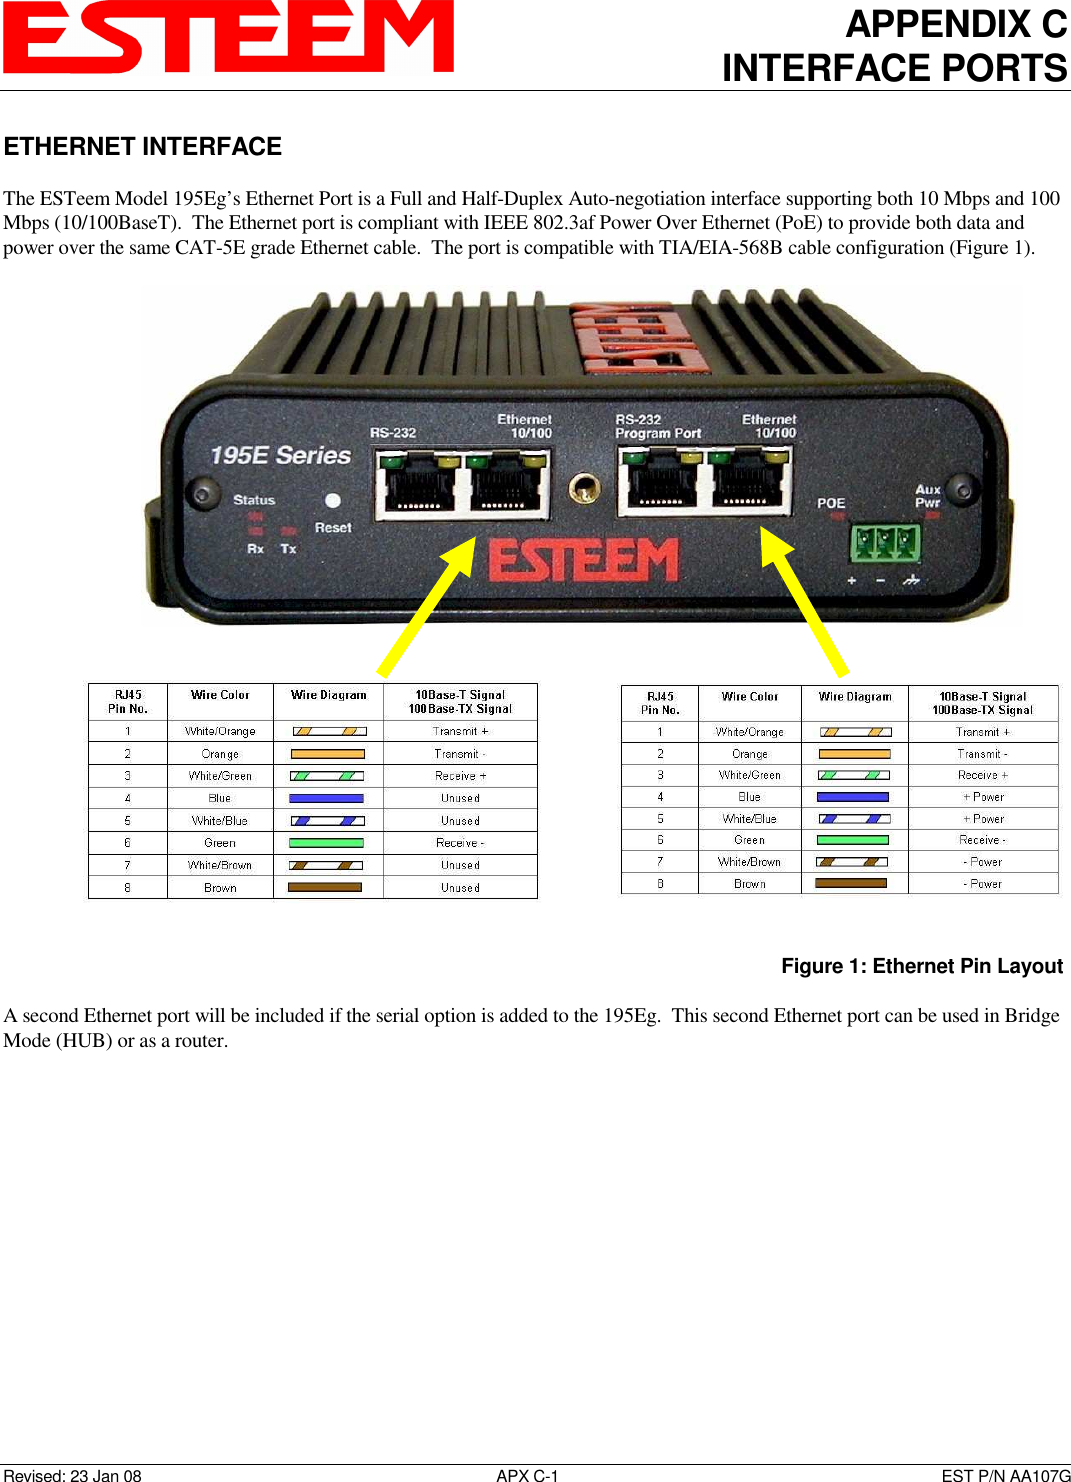 APPENDIX C INTERFACE PORTS   Revised: 23 Jan 08  APX C-1  EST P/N AA107G ETHERNET INTERFACE  The ESTeem Model 195Eg’s Ethernet Port is a Full and Half-Duplex Auto-negotiation interface supporting both 10 Mbps and 100 Mbps (10/100BaseT).  The Ethernet port is compliant with IEEE 802.3af Power Over Ethernet (PoE) to provide both data and power over the same CAT-5E grade Ethernet cable.  The port is compatible with TIA/EIA-568B cable configuration (Figure 1).  A second Ethernet port will be included if the serial option is added to the 195Eg.  This second Ethernet port can be used in Bridge Mode (HUB) or as a router.  Figure 1: Ethernet Pin Layout   